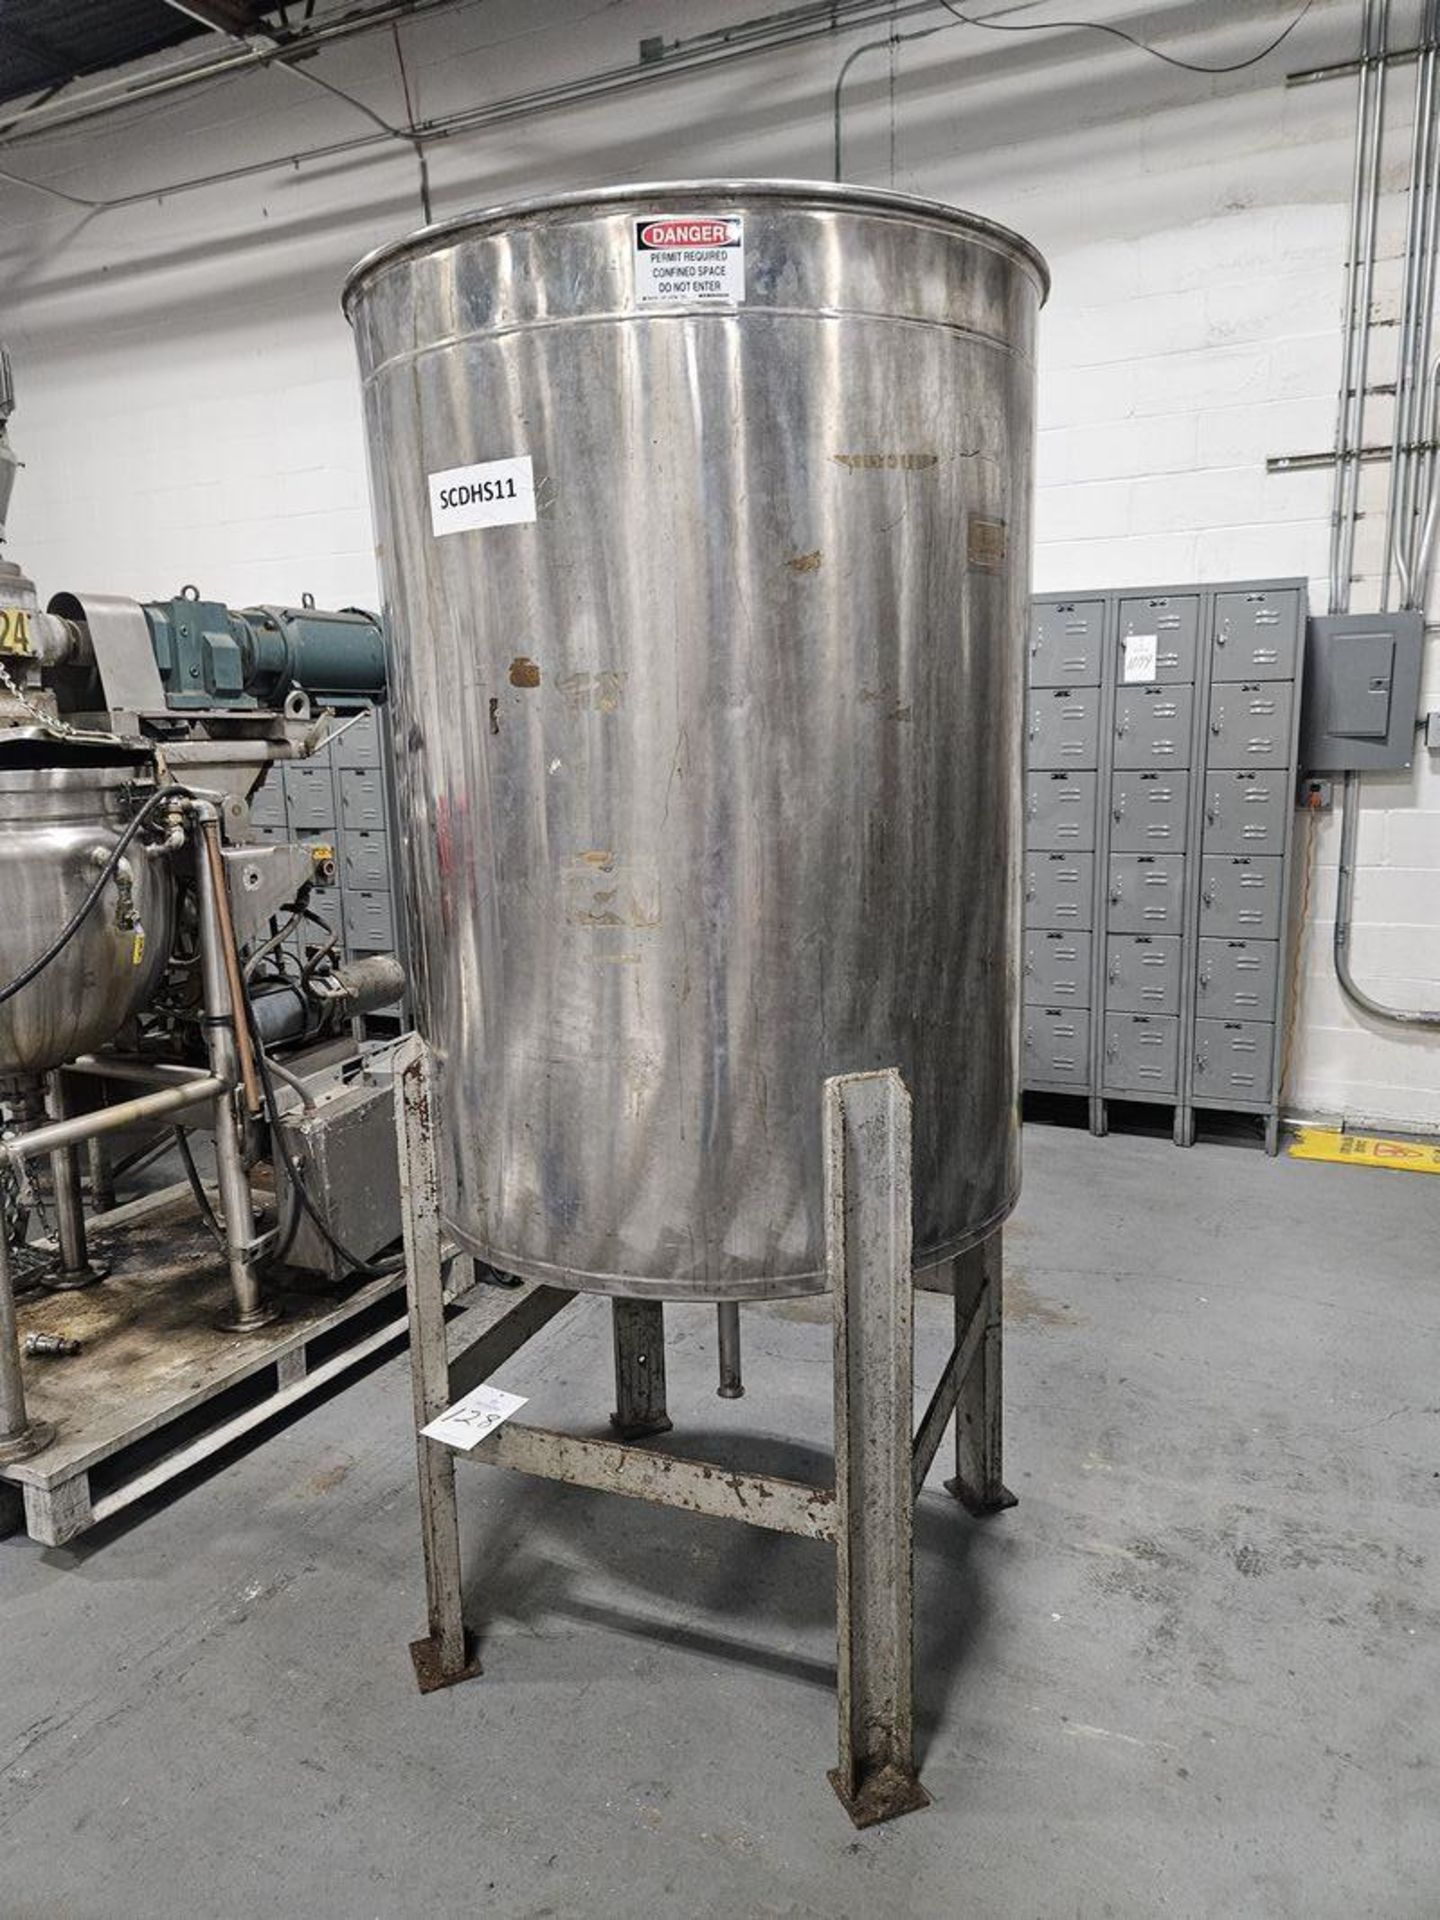 150 Gallon Stainless Steel Mixing Tank